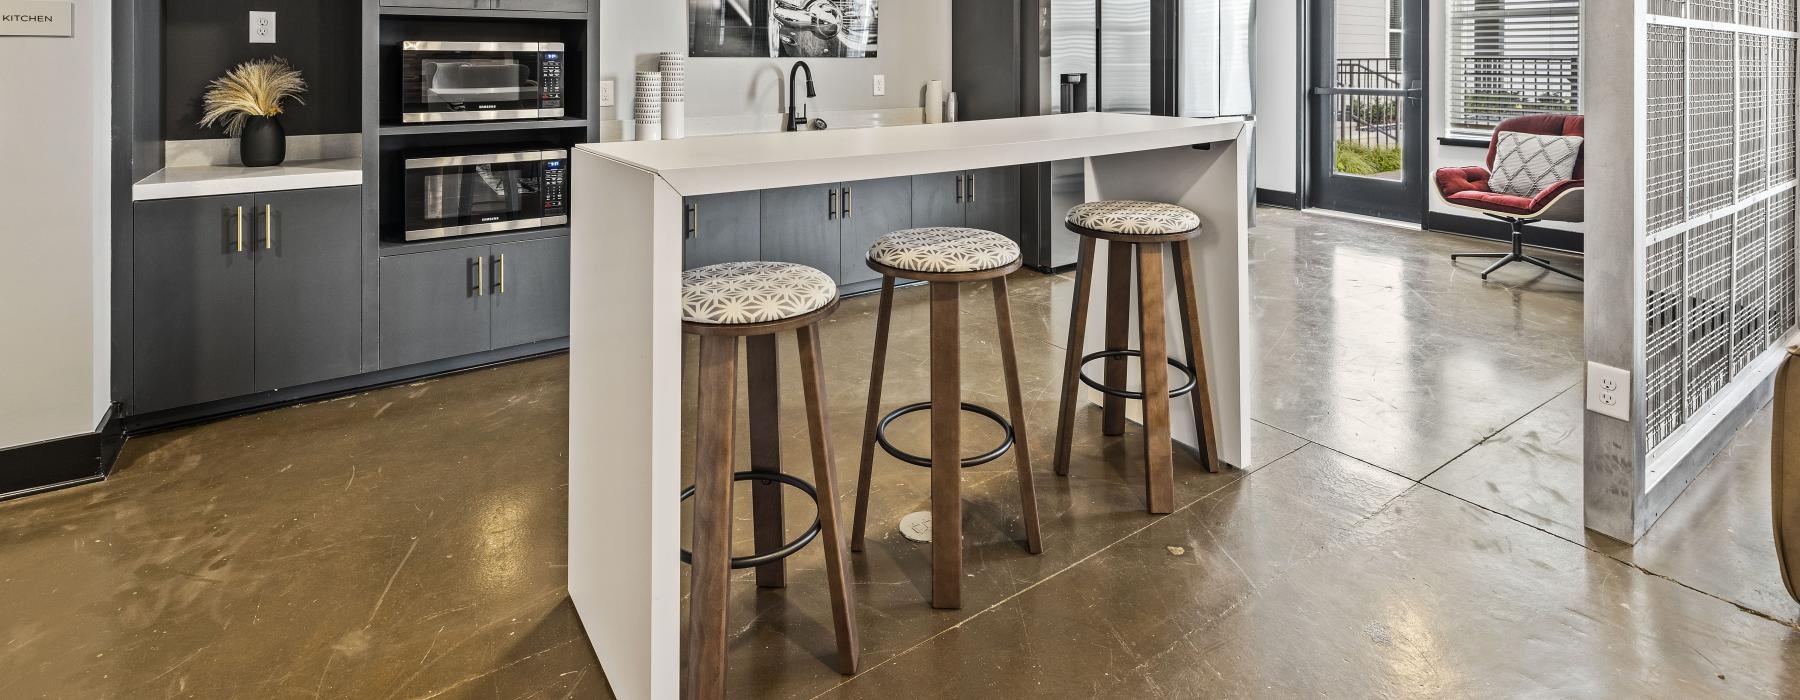 a kitchen with stools and a table